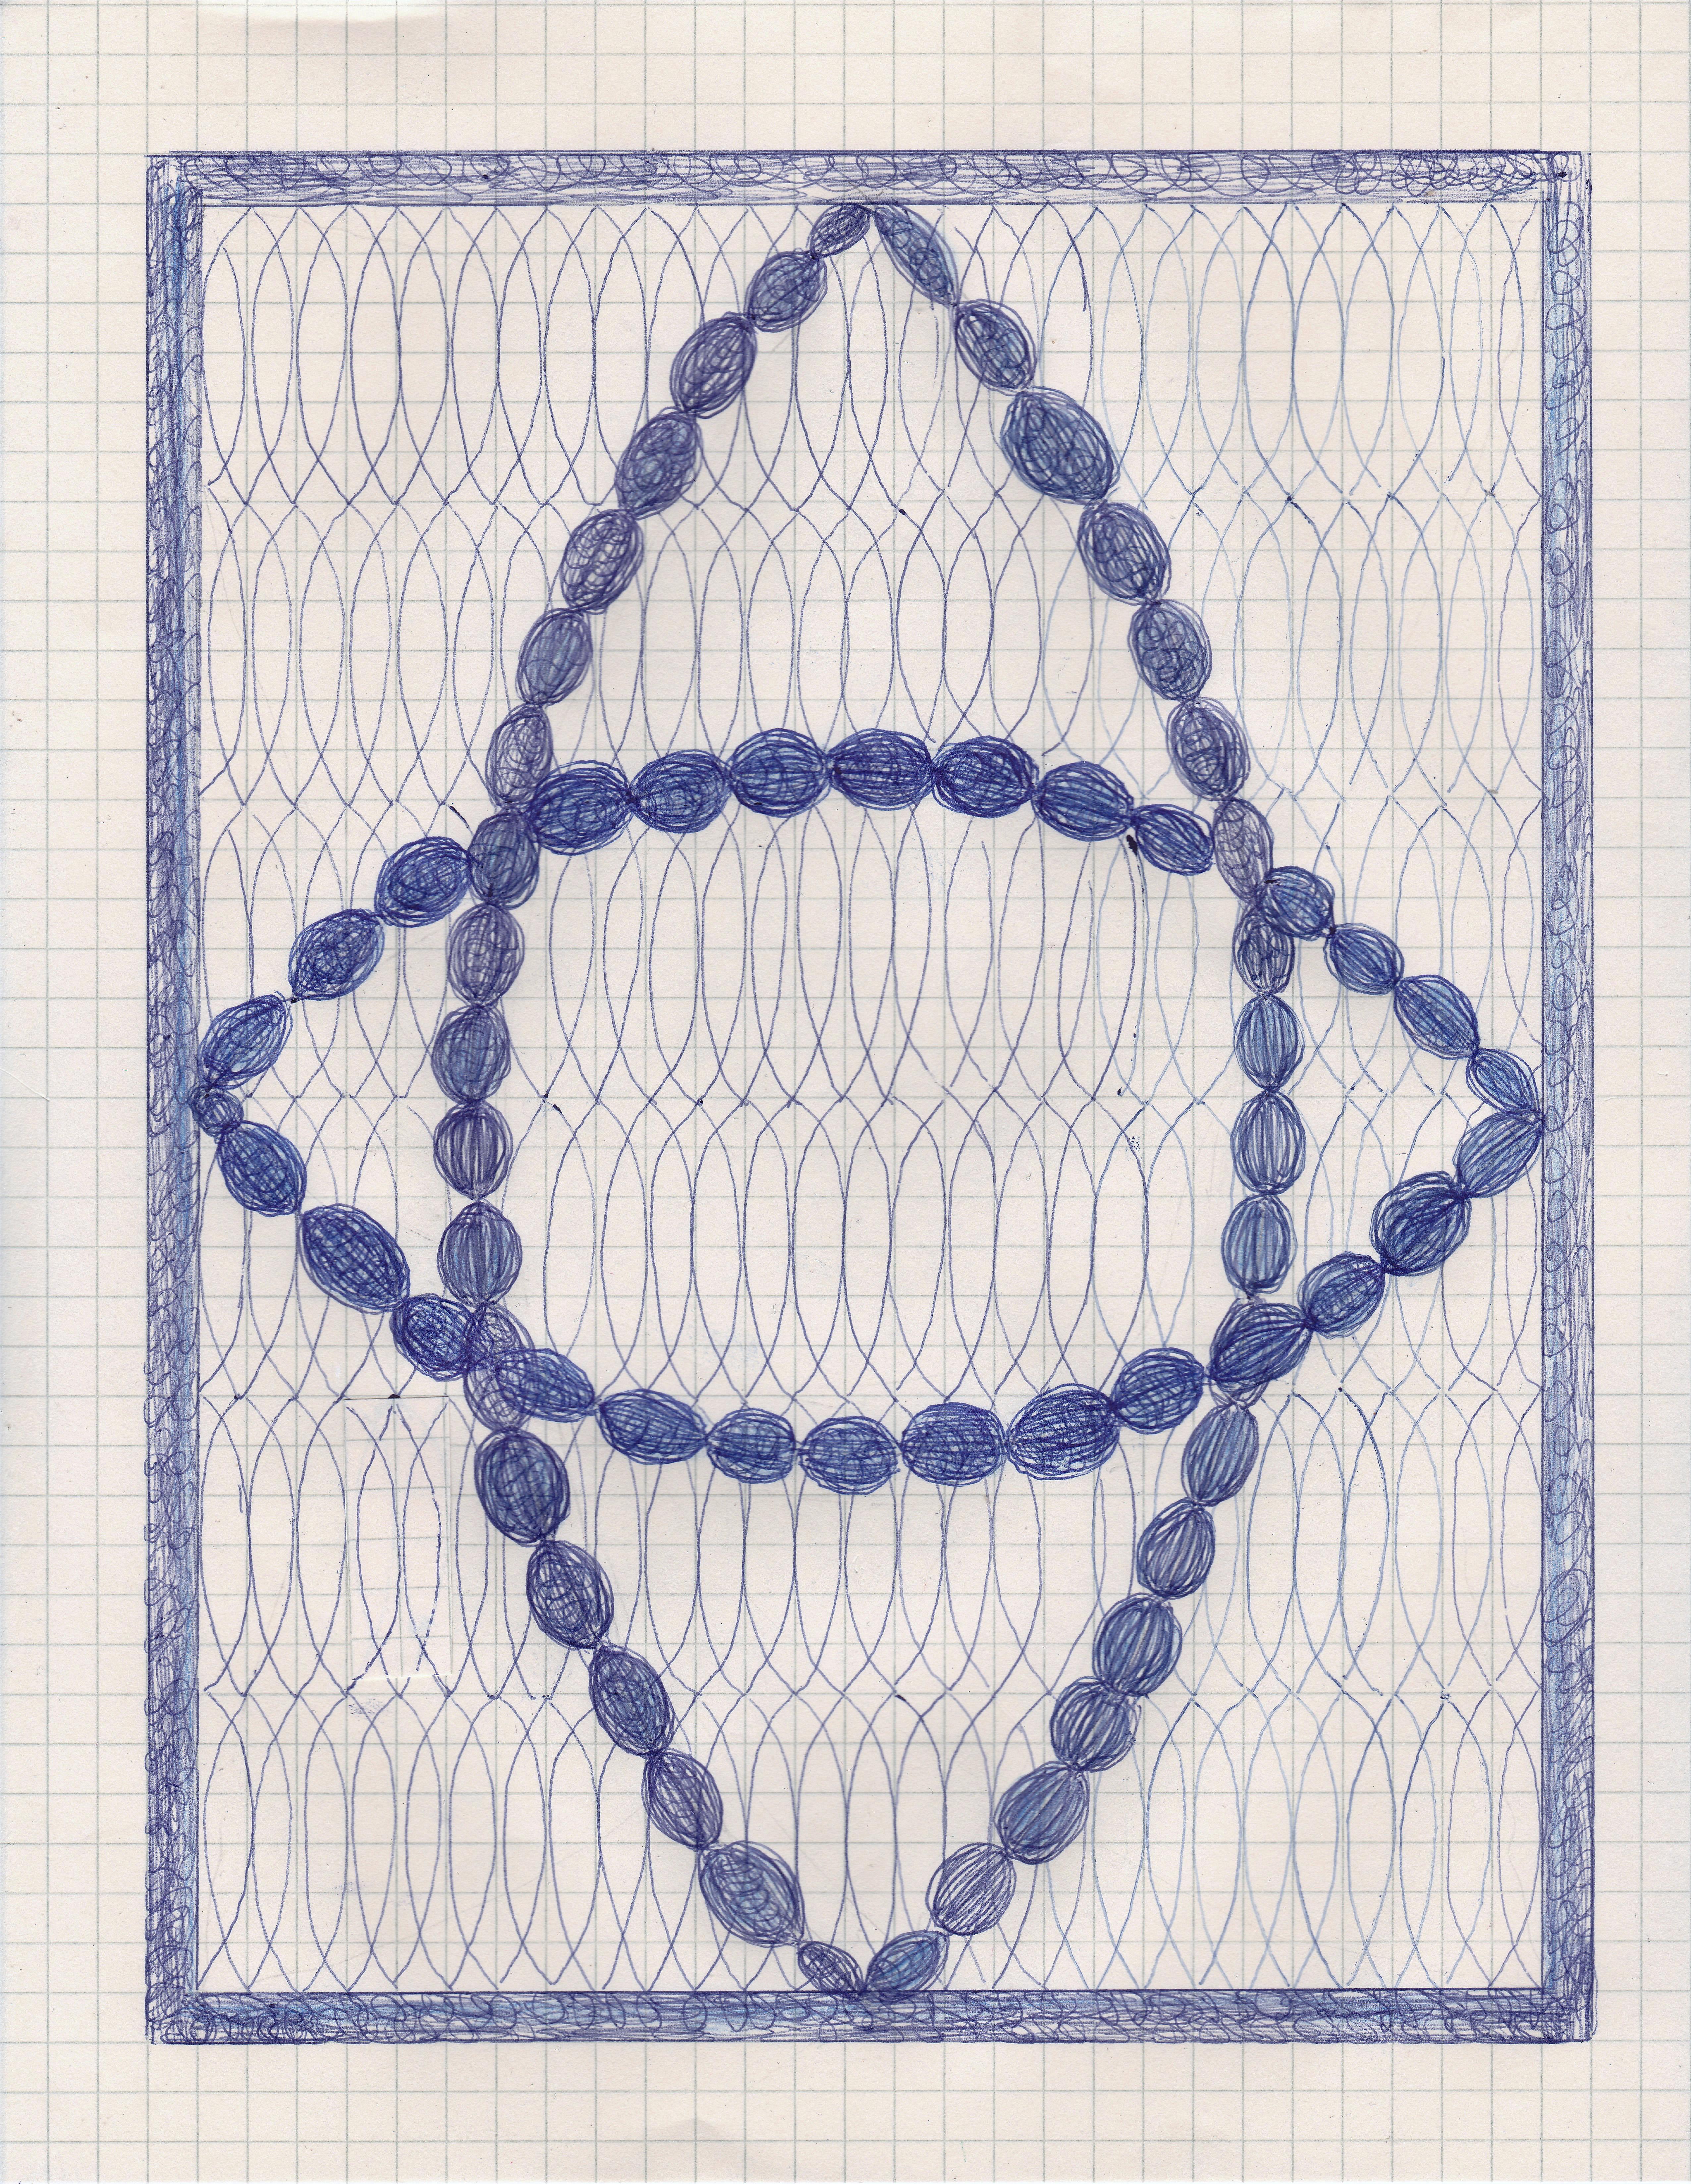 Caroline Blum Abstract Drawing - Double Vision, blue ink drawing on graph paper, geometric abstraction